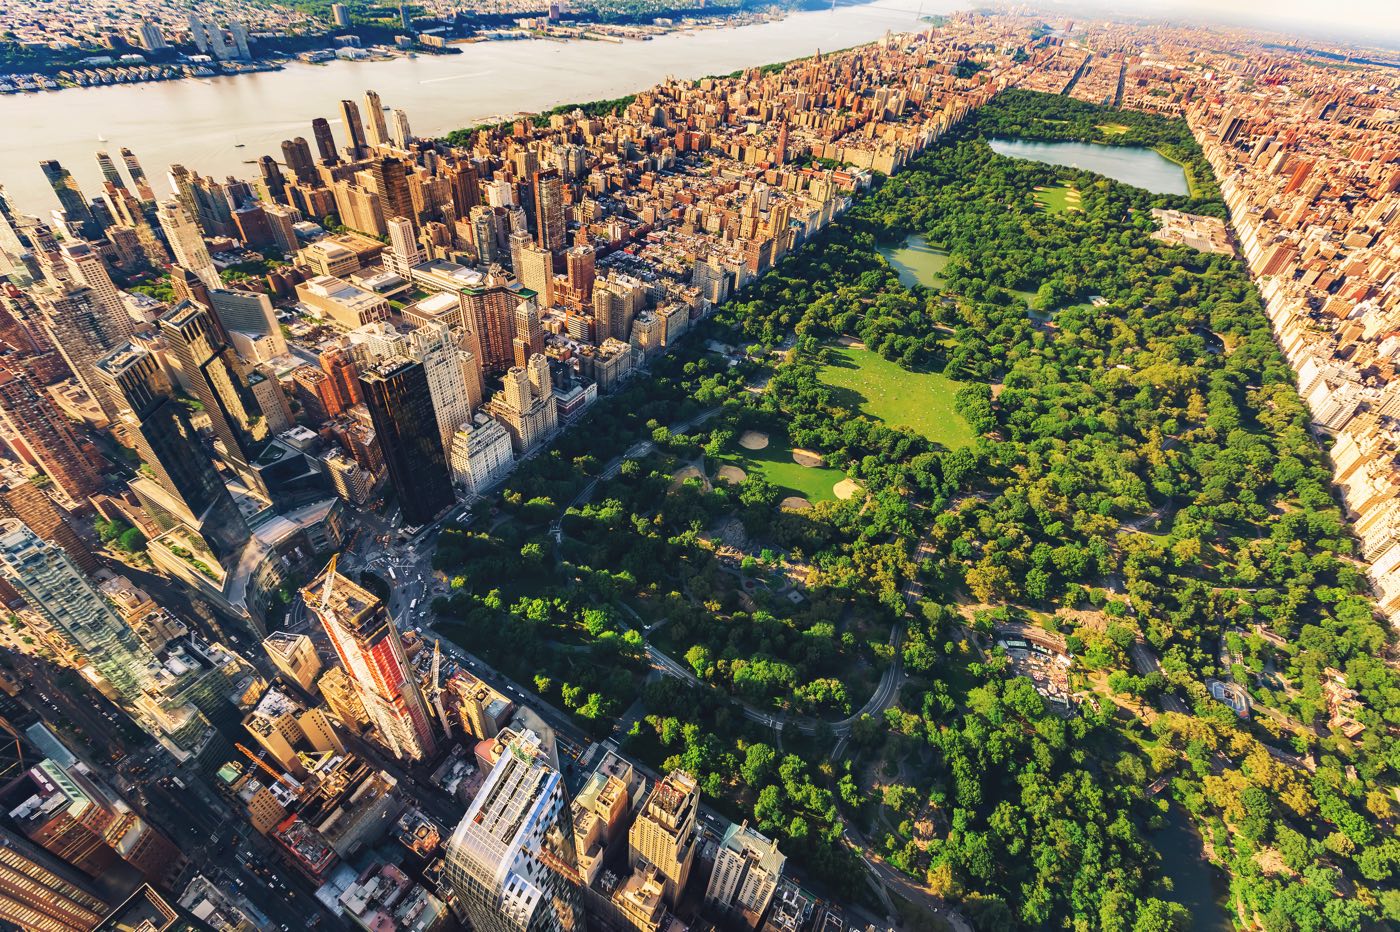 19+ FUN & MEMORABLE THINGS TO DO IN CENTRAL PARK